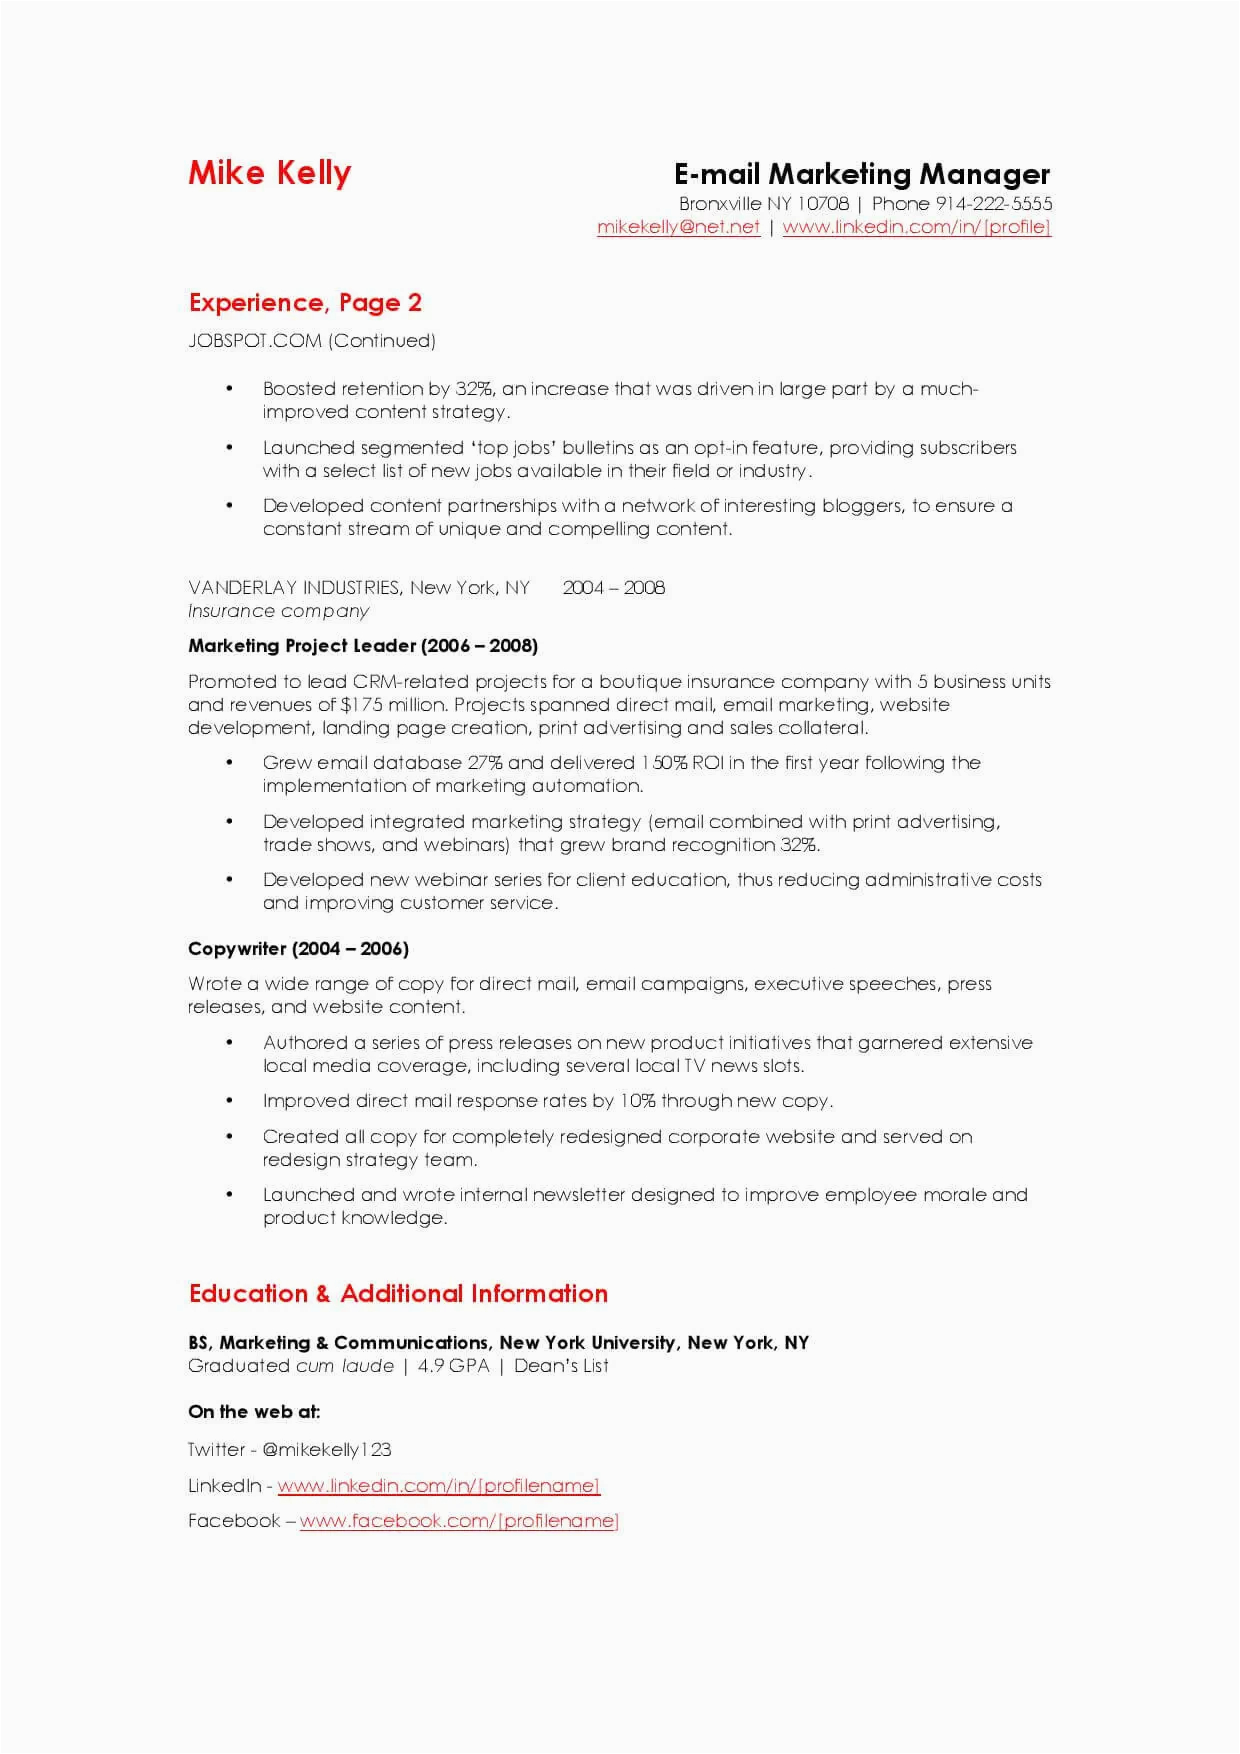 Contact and Email In Resume Sample 10 Marketing Resume Samples Hiring Managers Will Notice